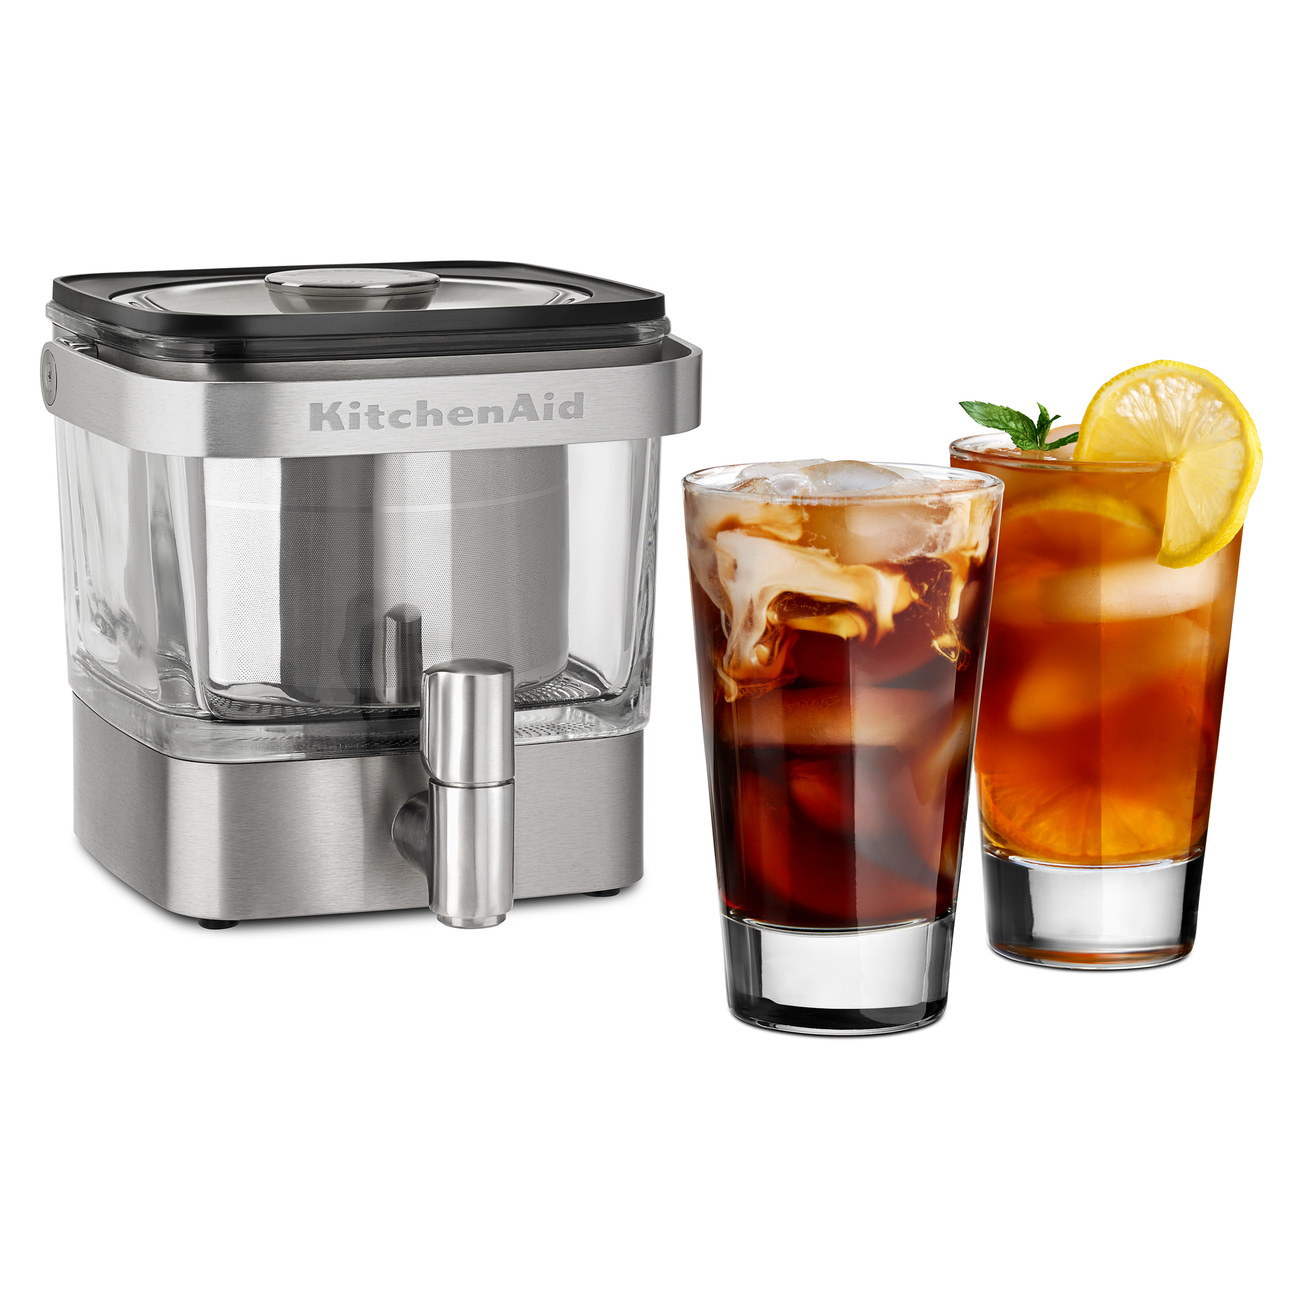 KitchenAid 28 oz Cold Brew Coffee Maker, Brushed Stainless Steel, KCM4212 - image 2 of 8